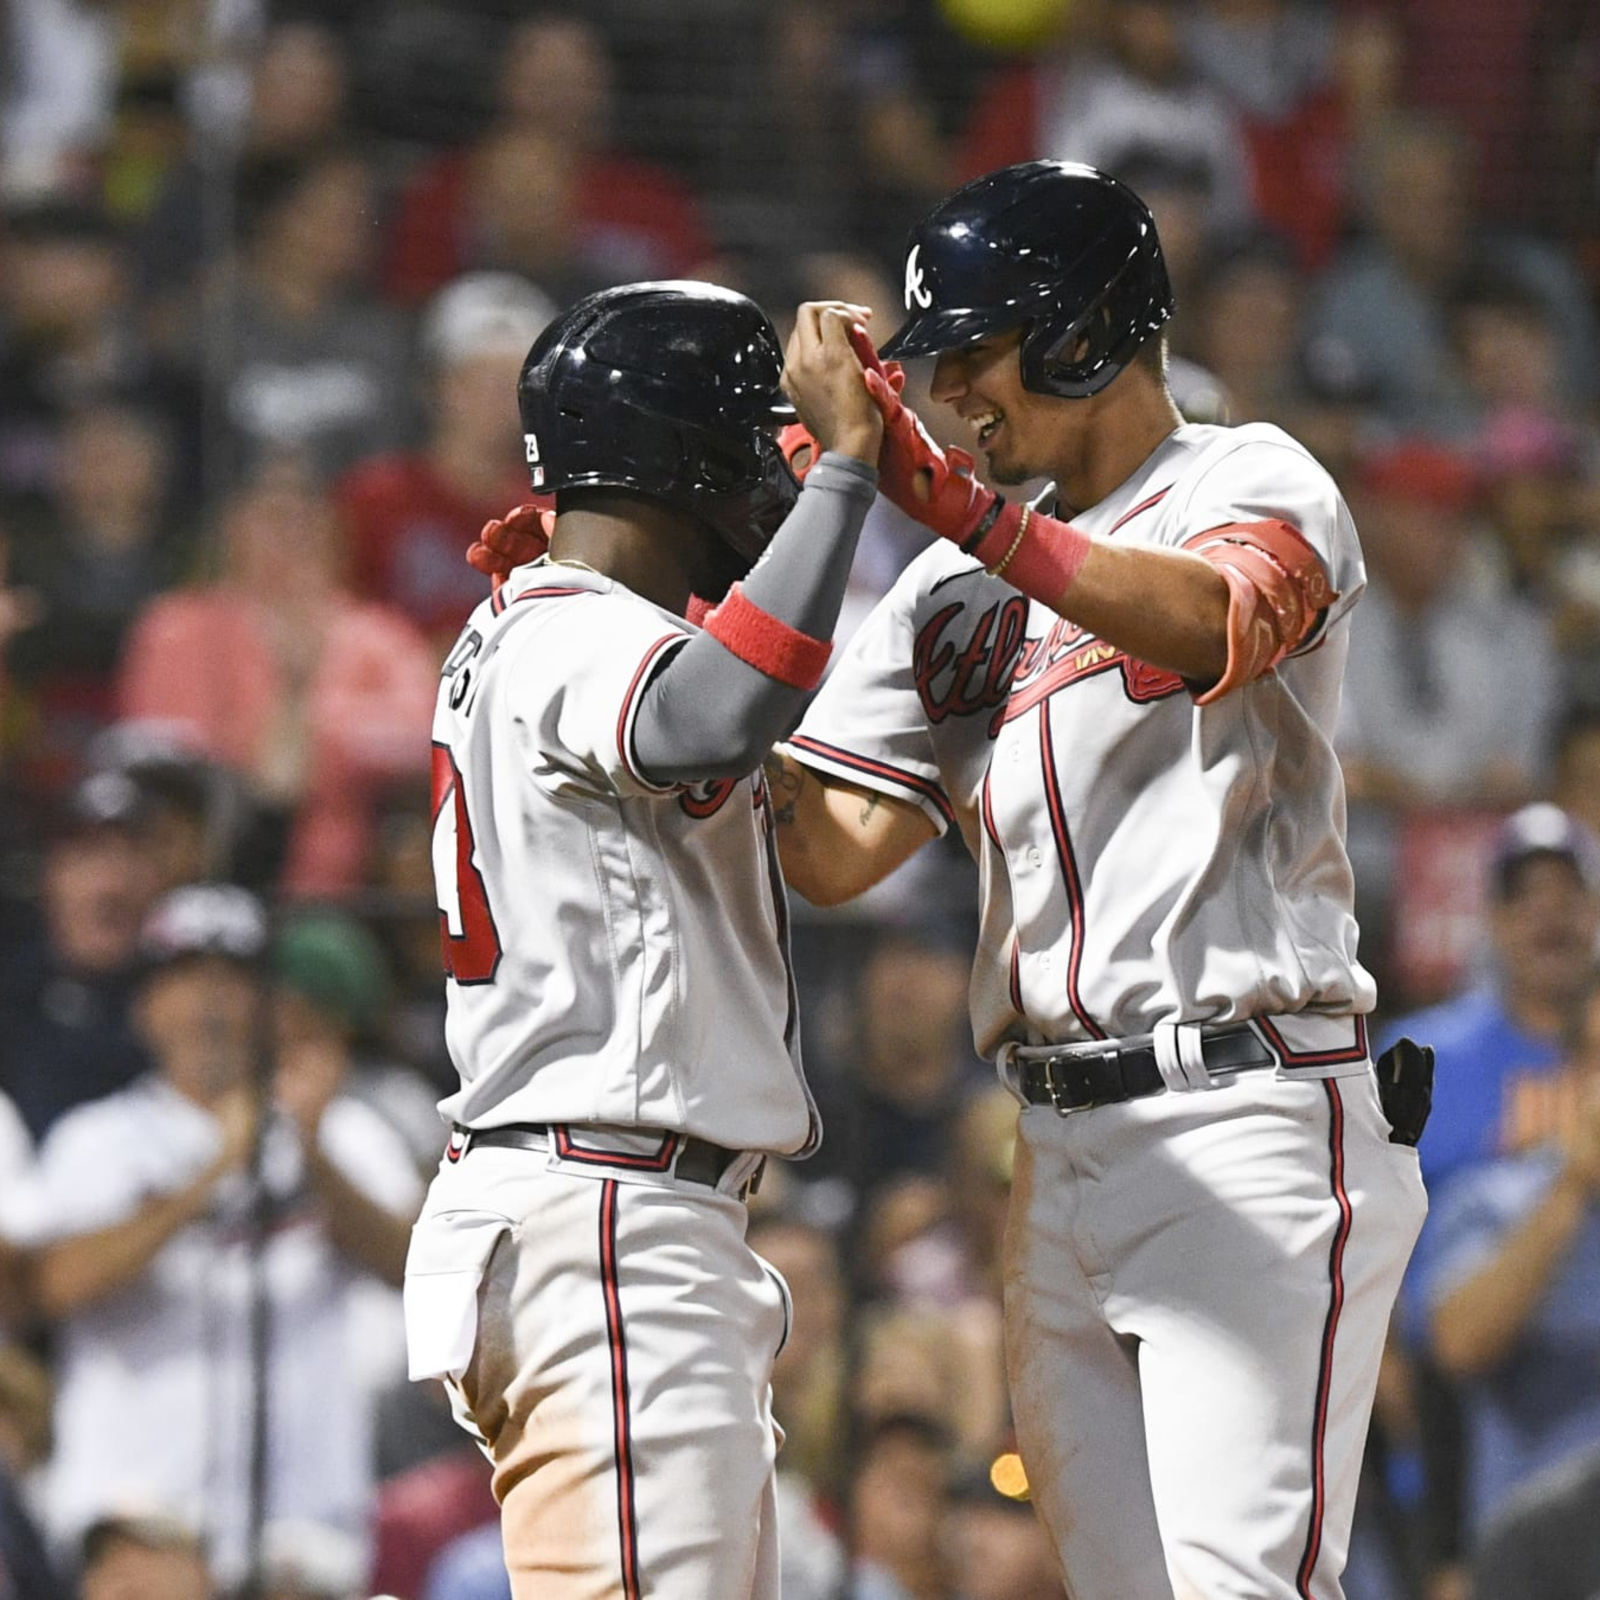 MLB Power Rankings: Braves Surge Into Top 5 While Yankees